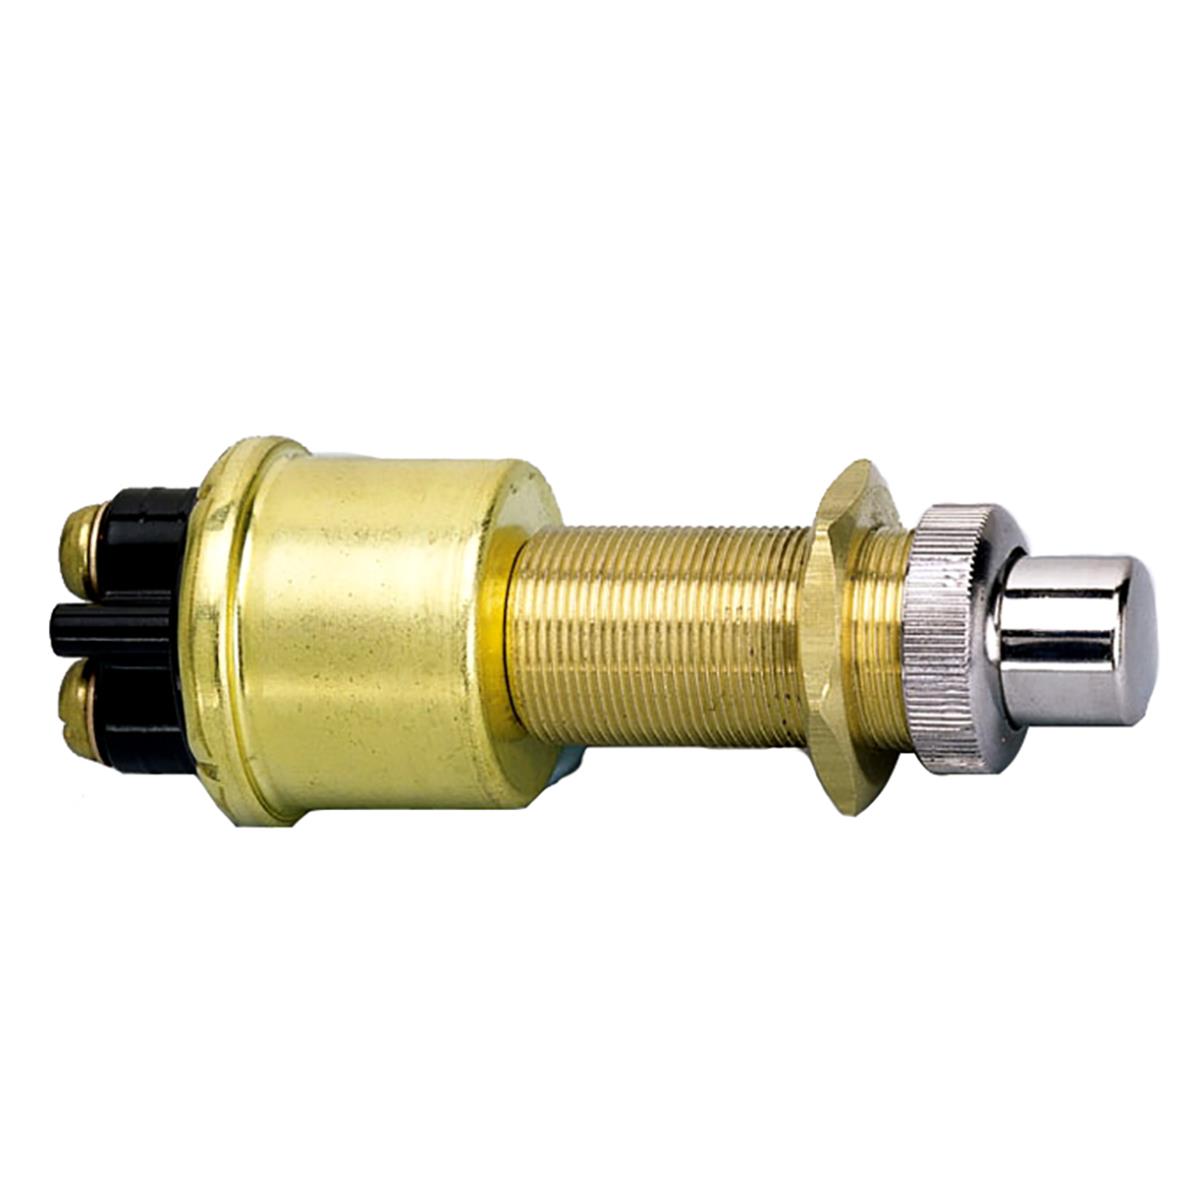 Picture of BEP Marine 1001504 2 Position for 35 Amp SPST Heavy Duty Push Button Switch - Off & On